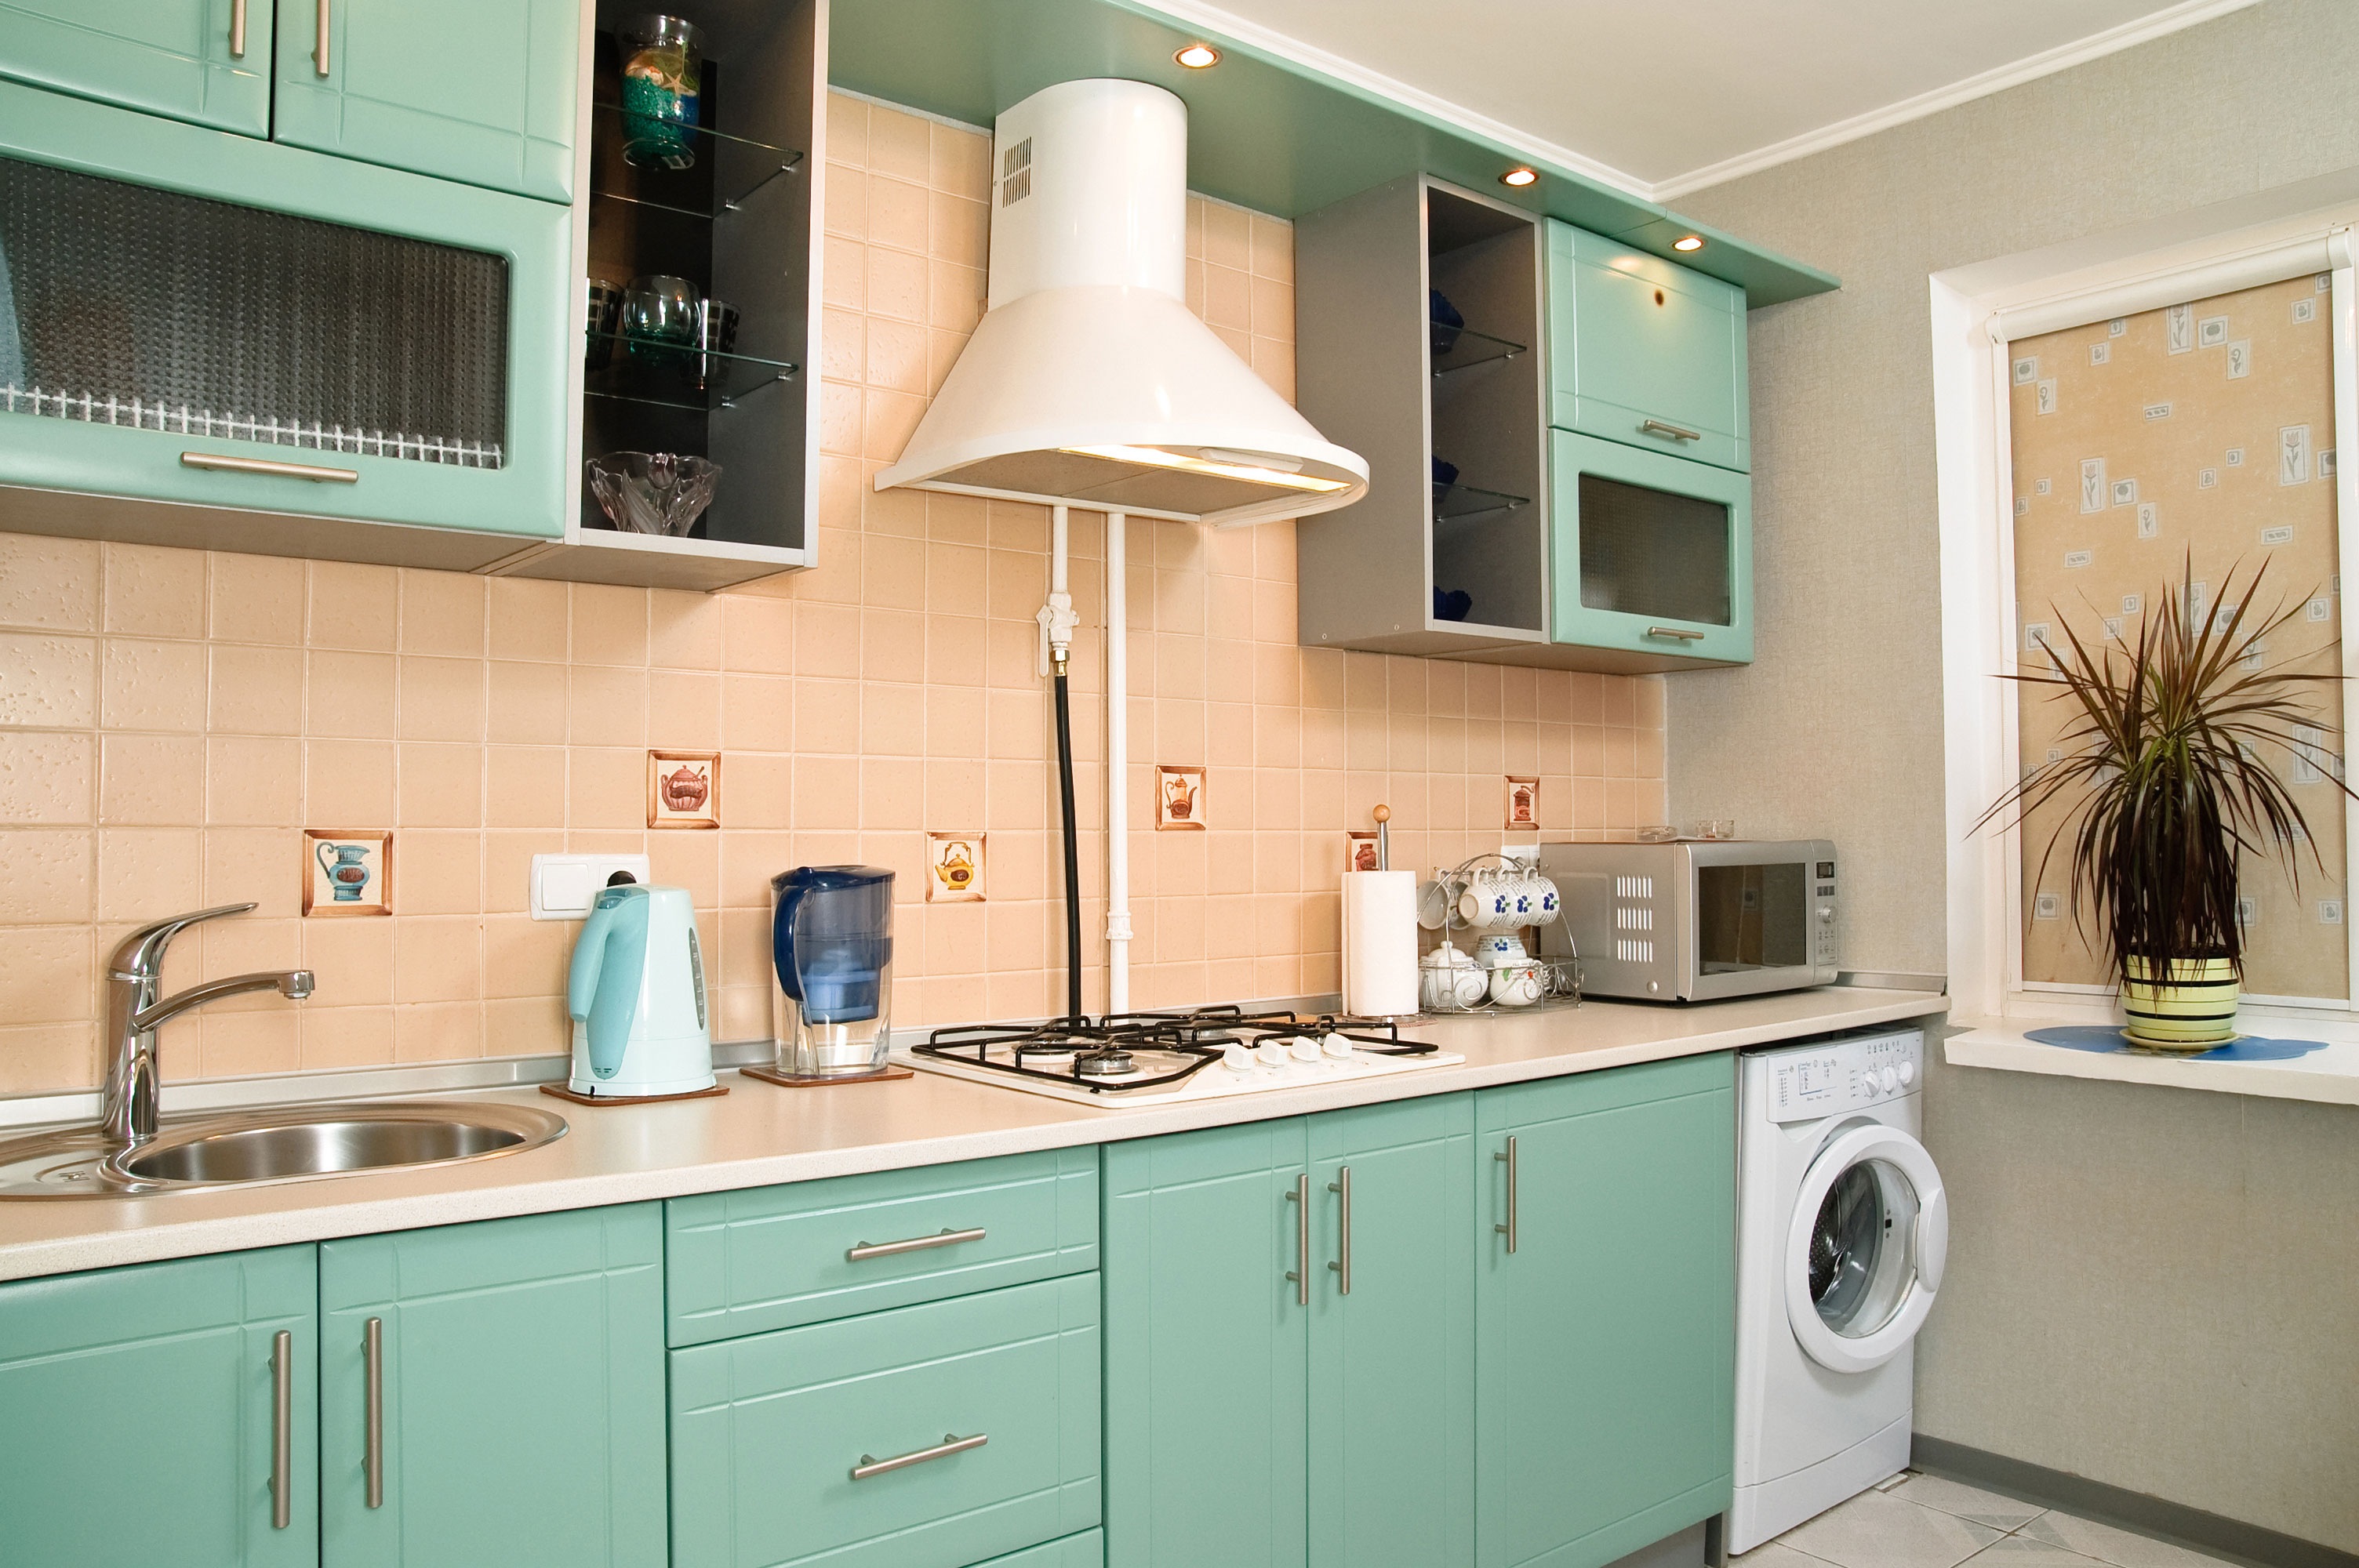 Breezy-retro-kitchen-in-a-subtle-shade-of-mint-